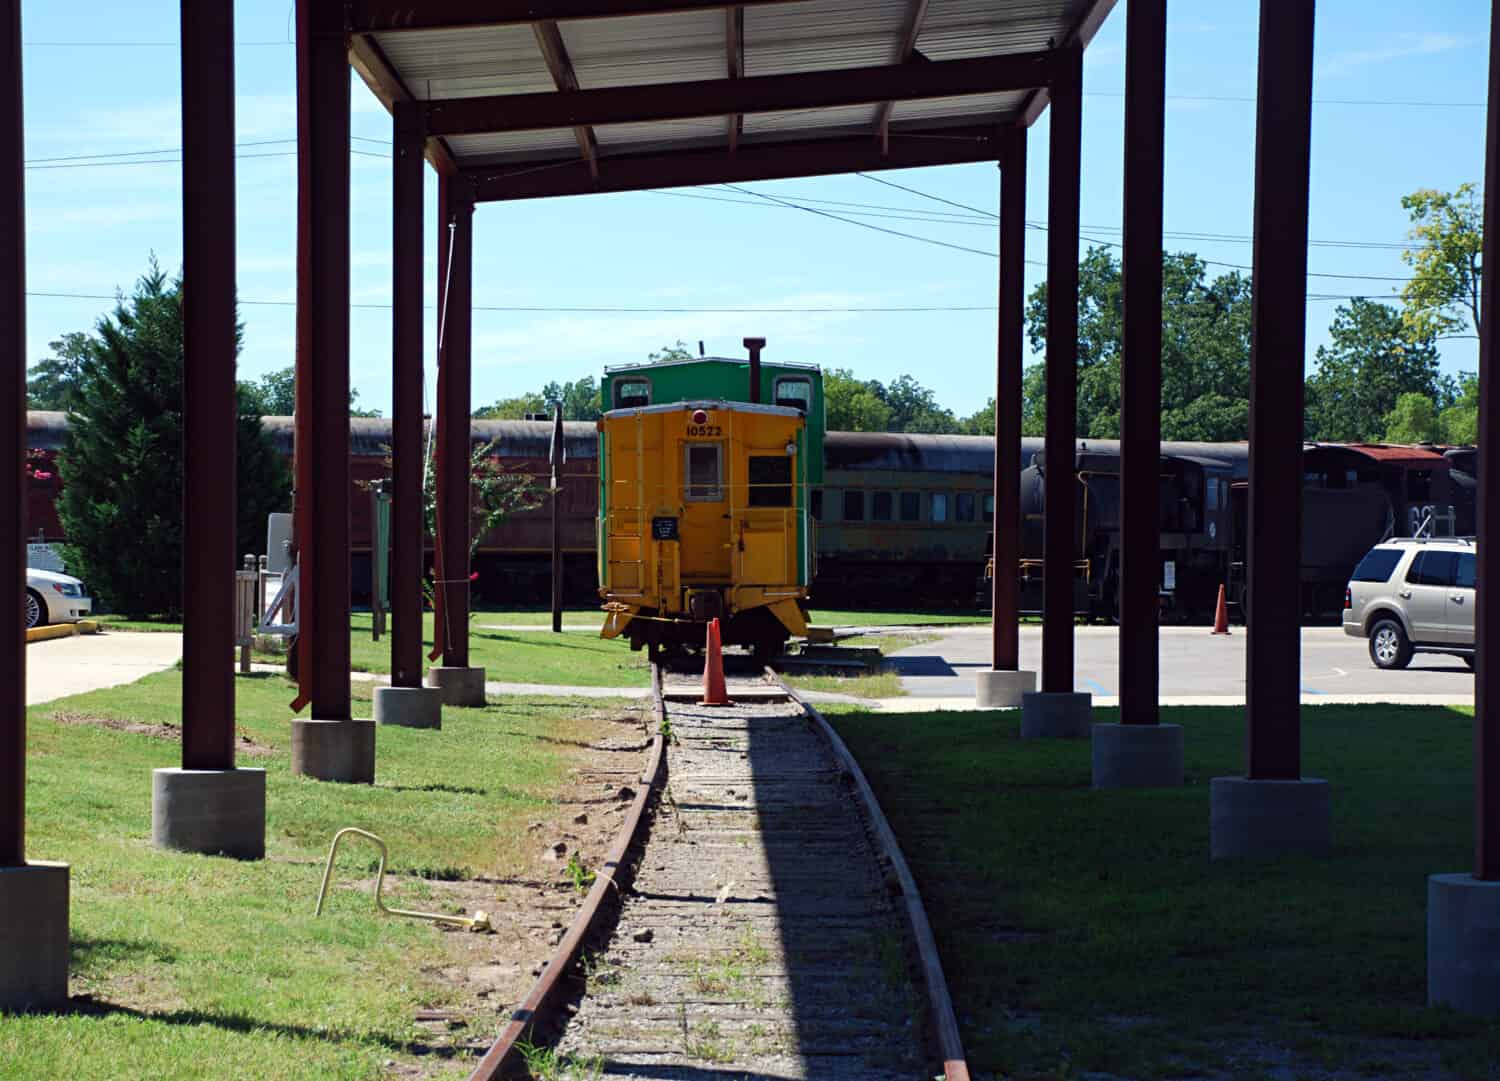 Old Caboose on the tracks